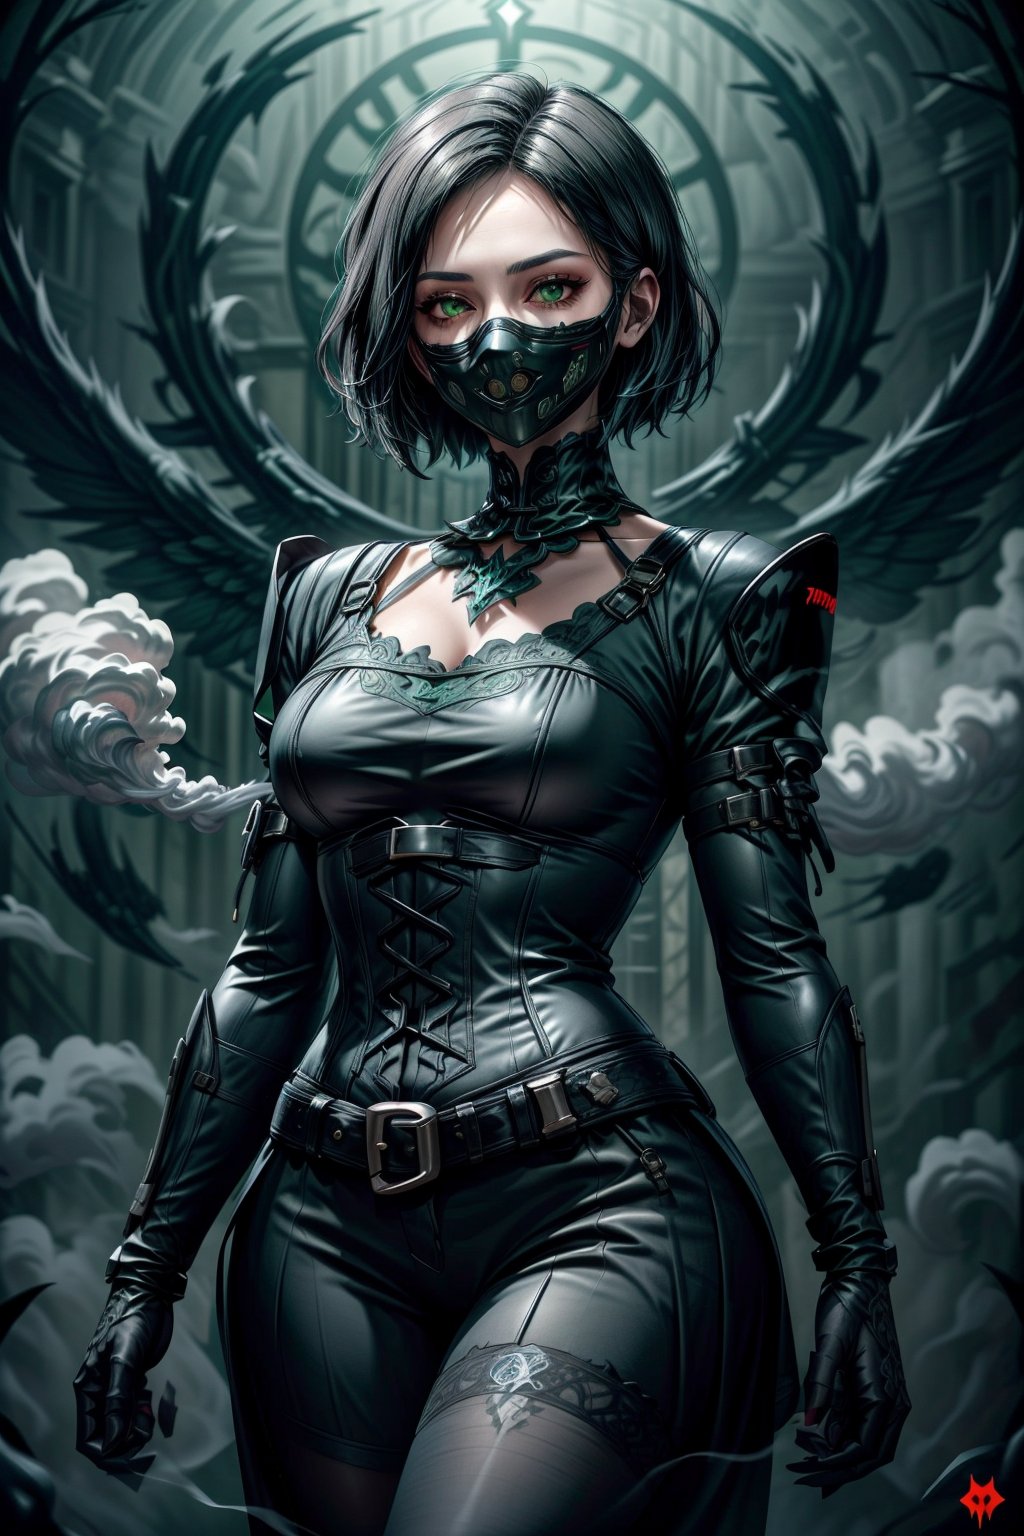 a medium shot of a gothic-themed Viper skin featuring dark, elegant armor with ornate silver details, a menacing plague doctor mask, and eerie green smoke emanating from her gear, with her abilities enhanced by spectral effects, set against the backdrop of a haunted, fog-shrouded Victorian manor, valorant viper,Gothic